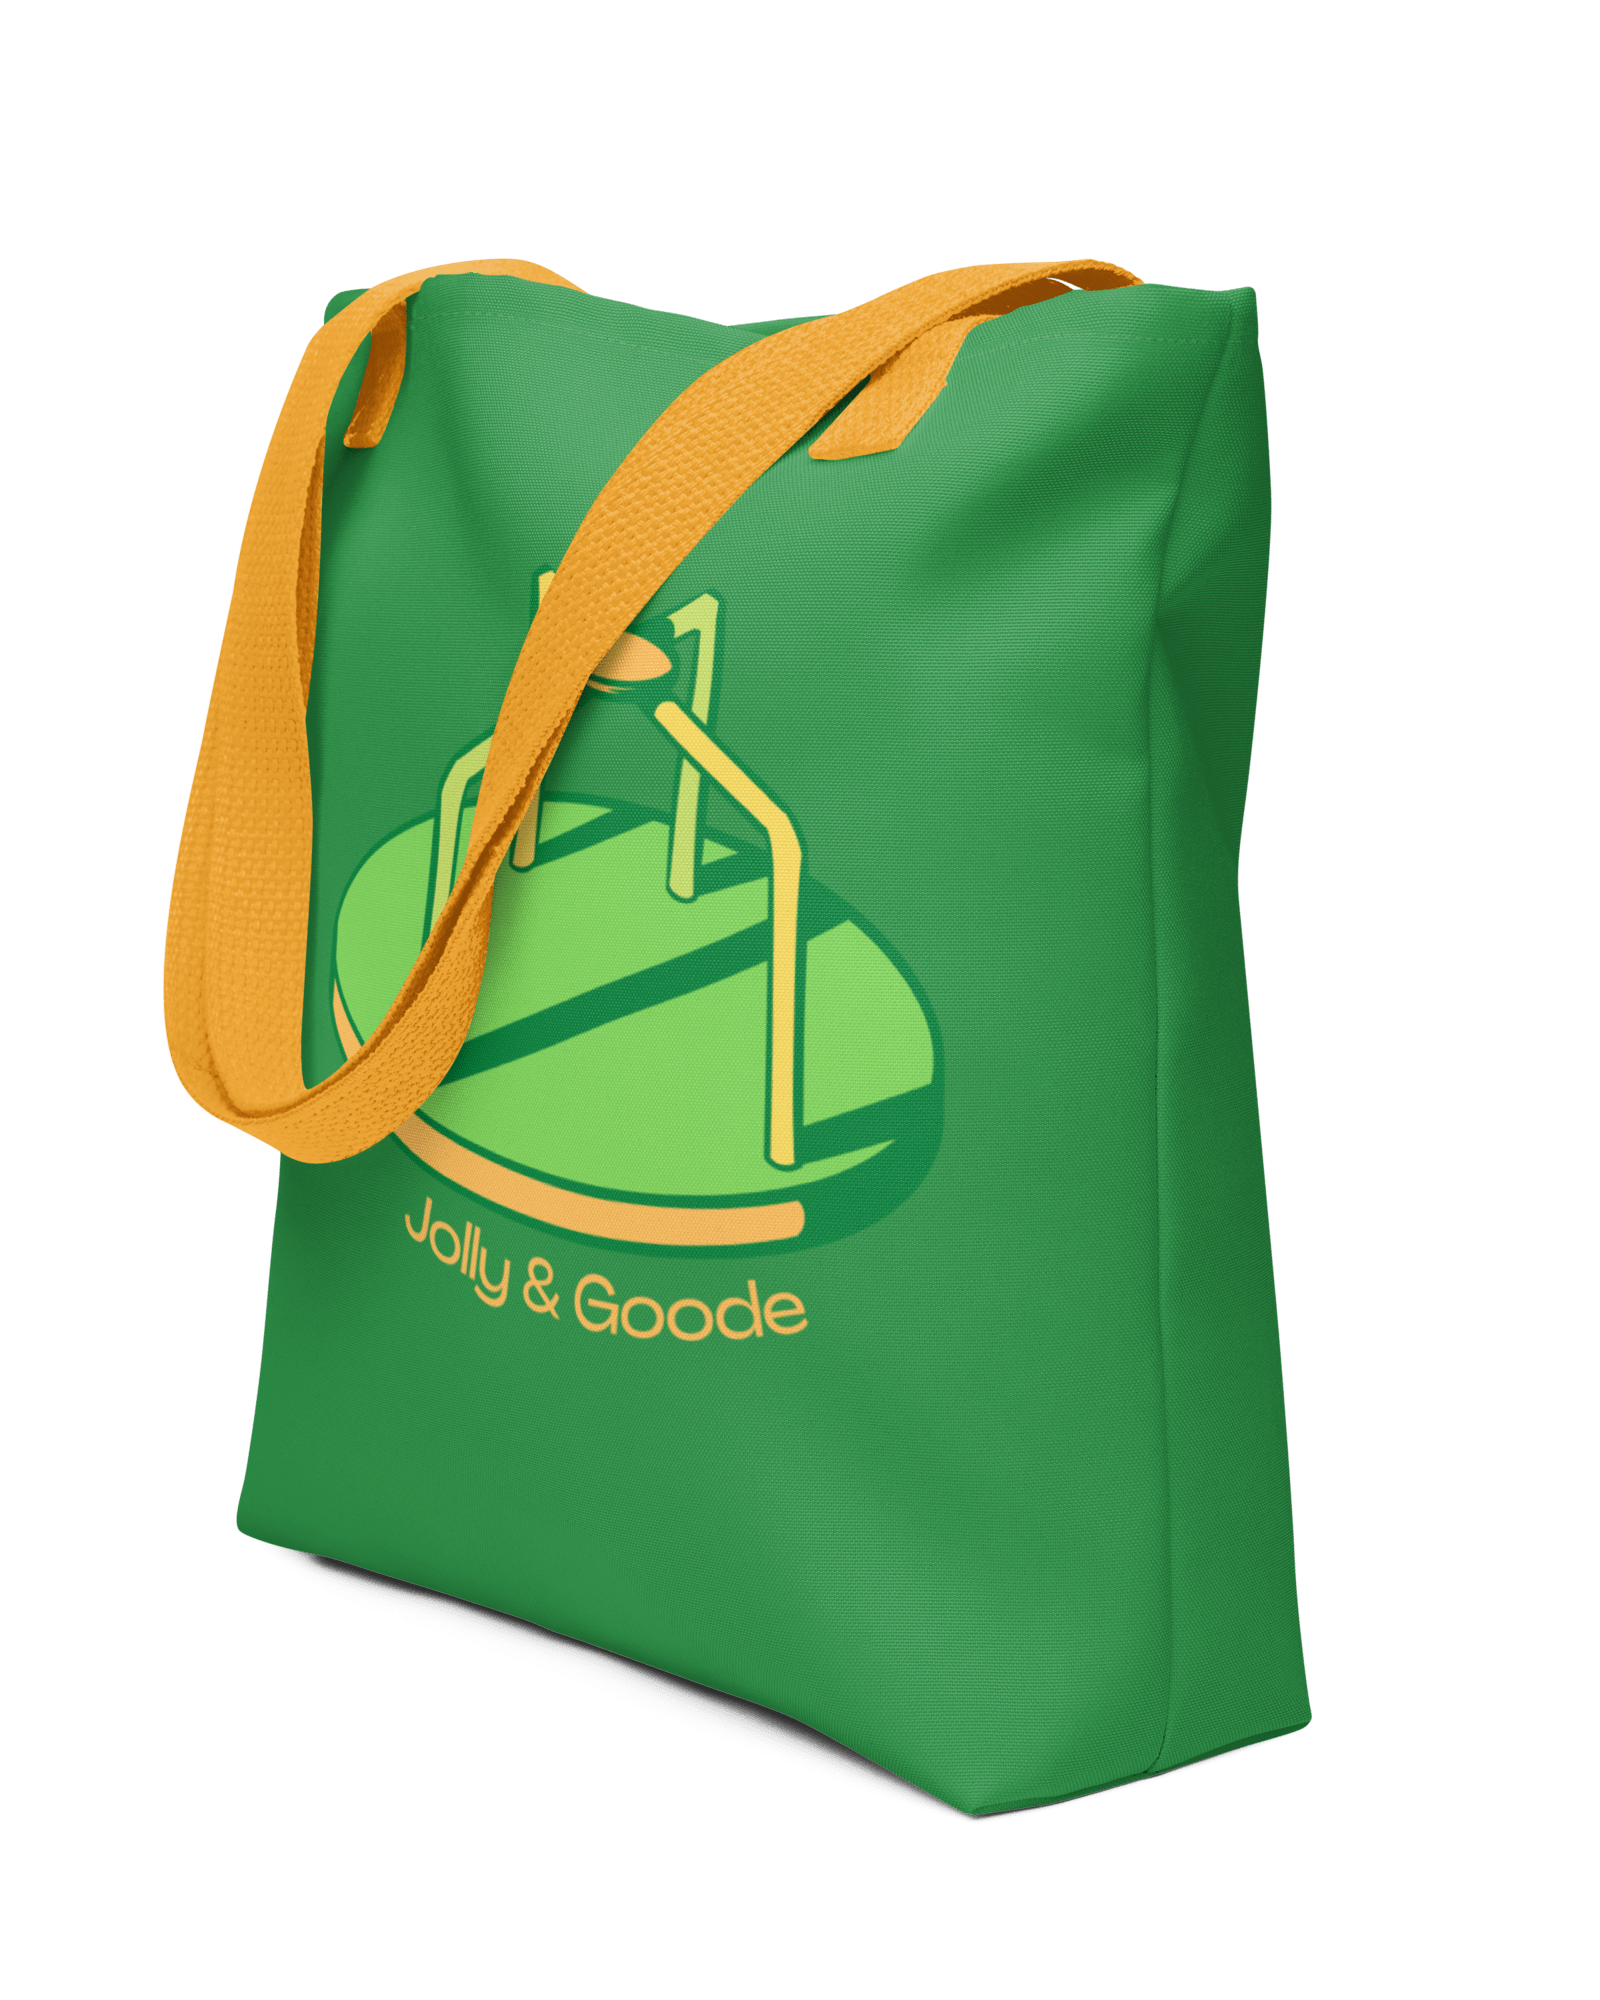 Merry Go Round Tote Bag Luggage & Bags Jolly & Goode